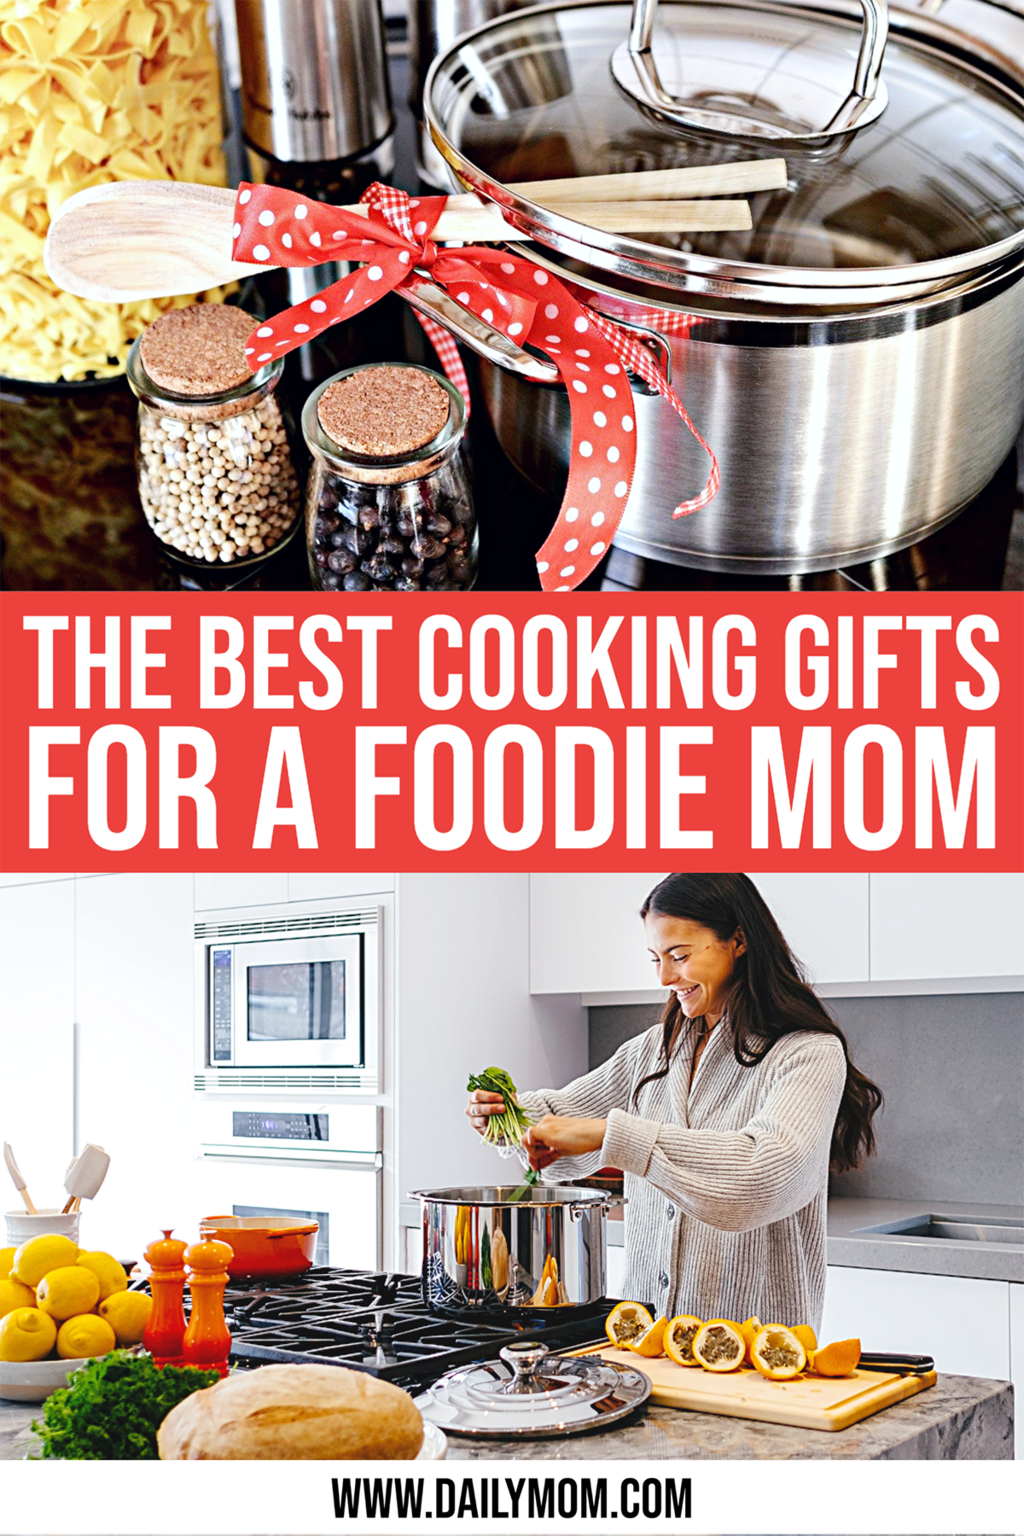 https://dailymom.com/portal/wp-content/uploads/2021/04/Food-Gifts-for-Mom-1.png